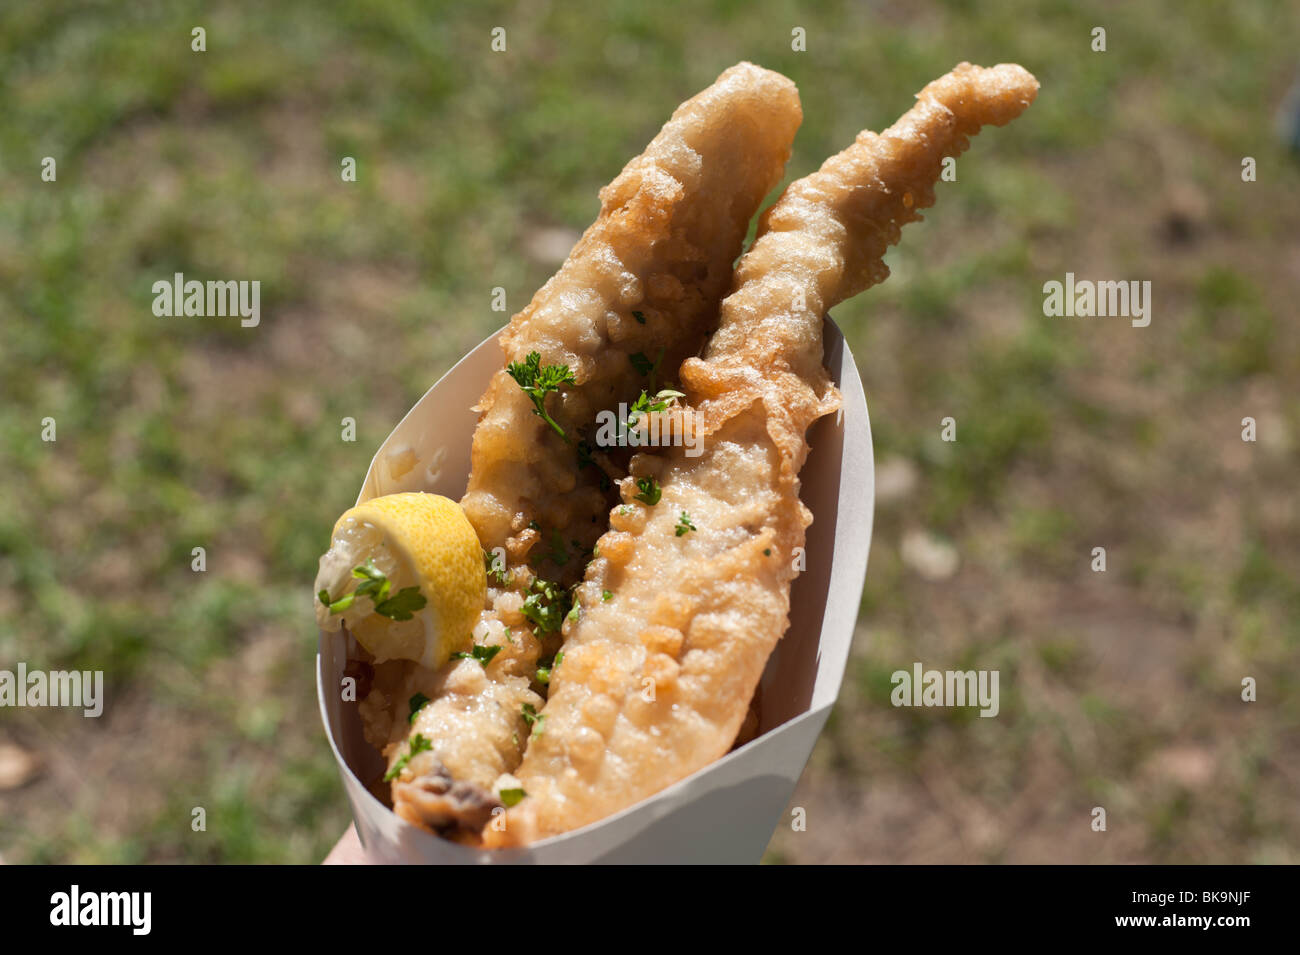 Deep fried local fish is stacked on chips and served in a cone of cardboard with a wedge of lemon and parsley for garnish Stock Photo